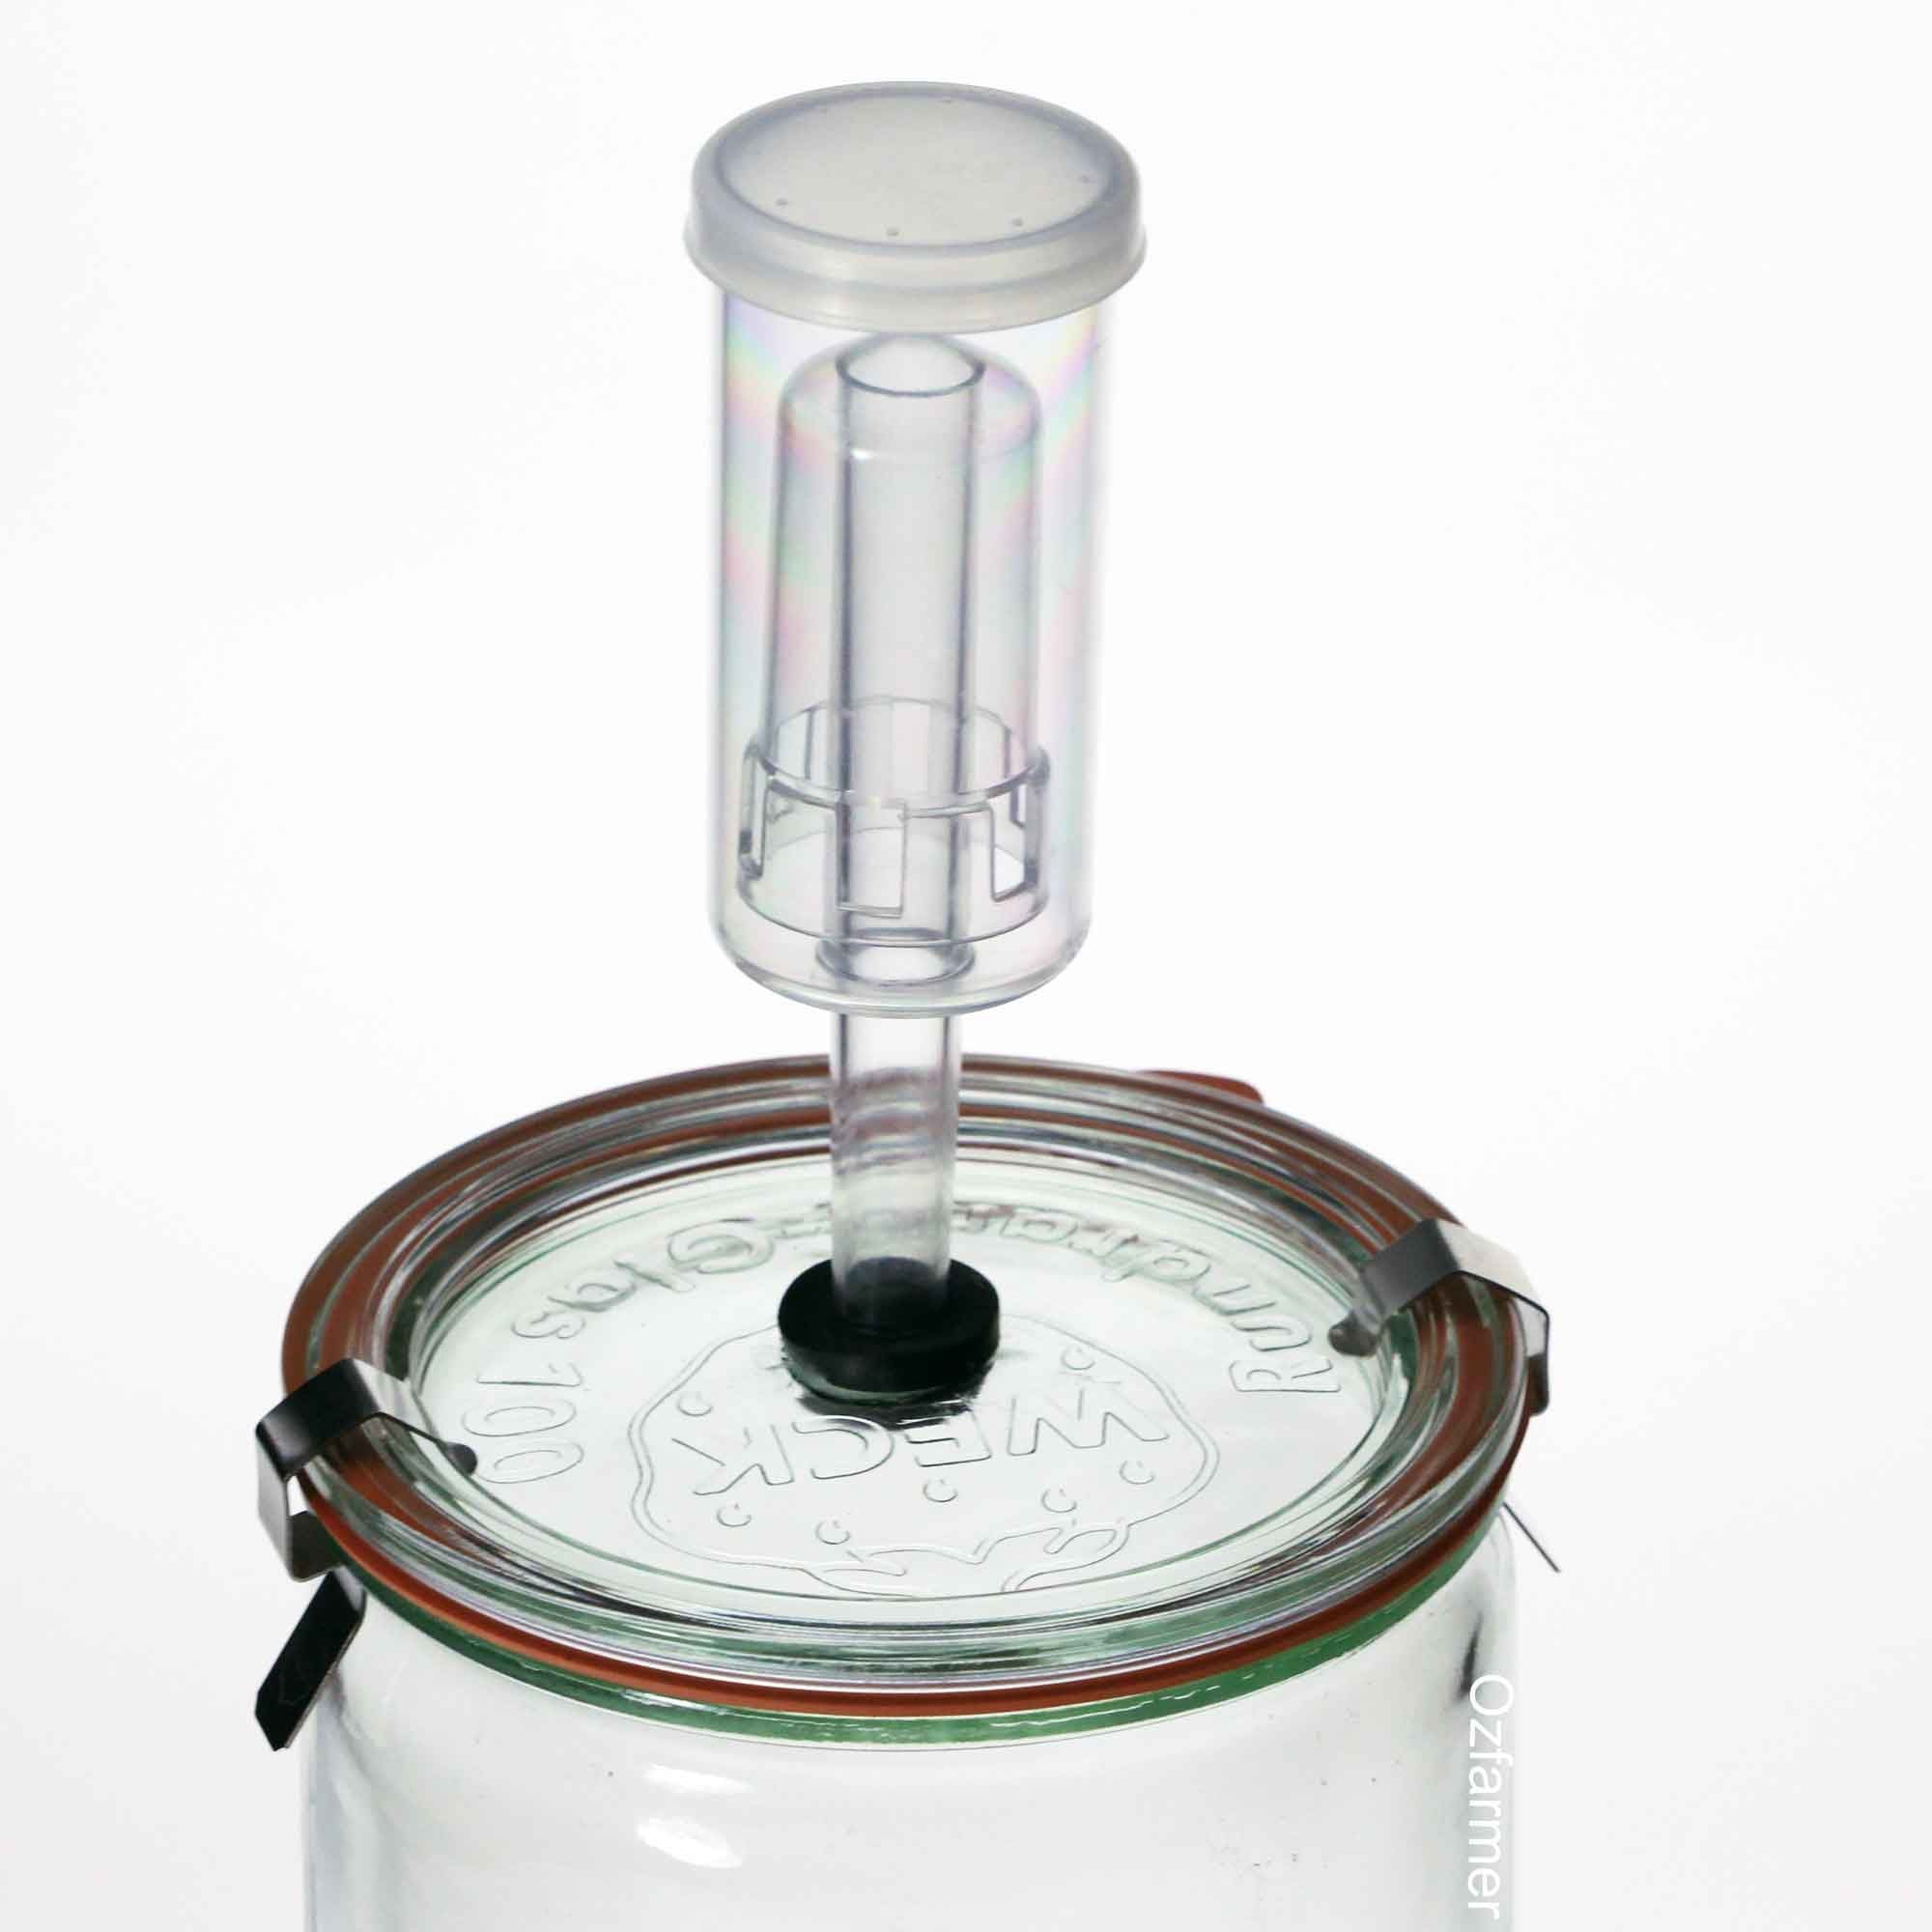 Large Weck Rex Fermenting Lid, Airlock, Seal and 2 Clips - NO JAR. SECONDS ONLY - Ball Mason Australia